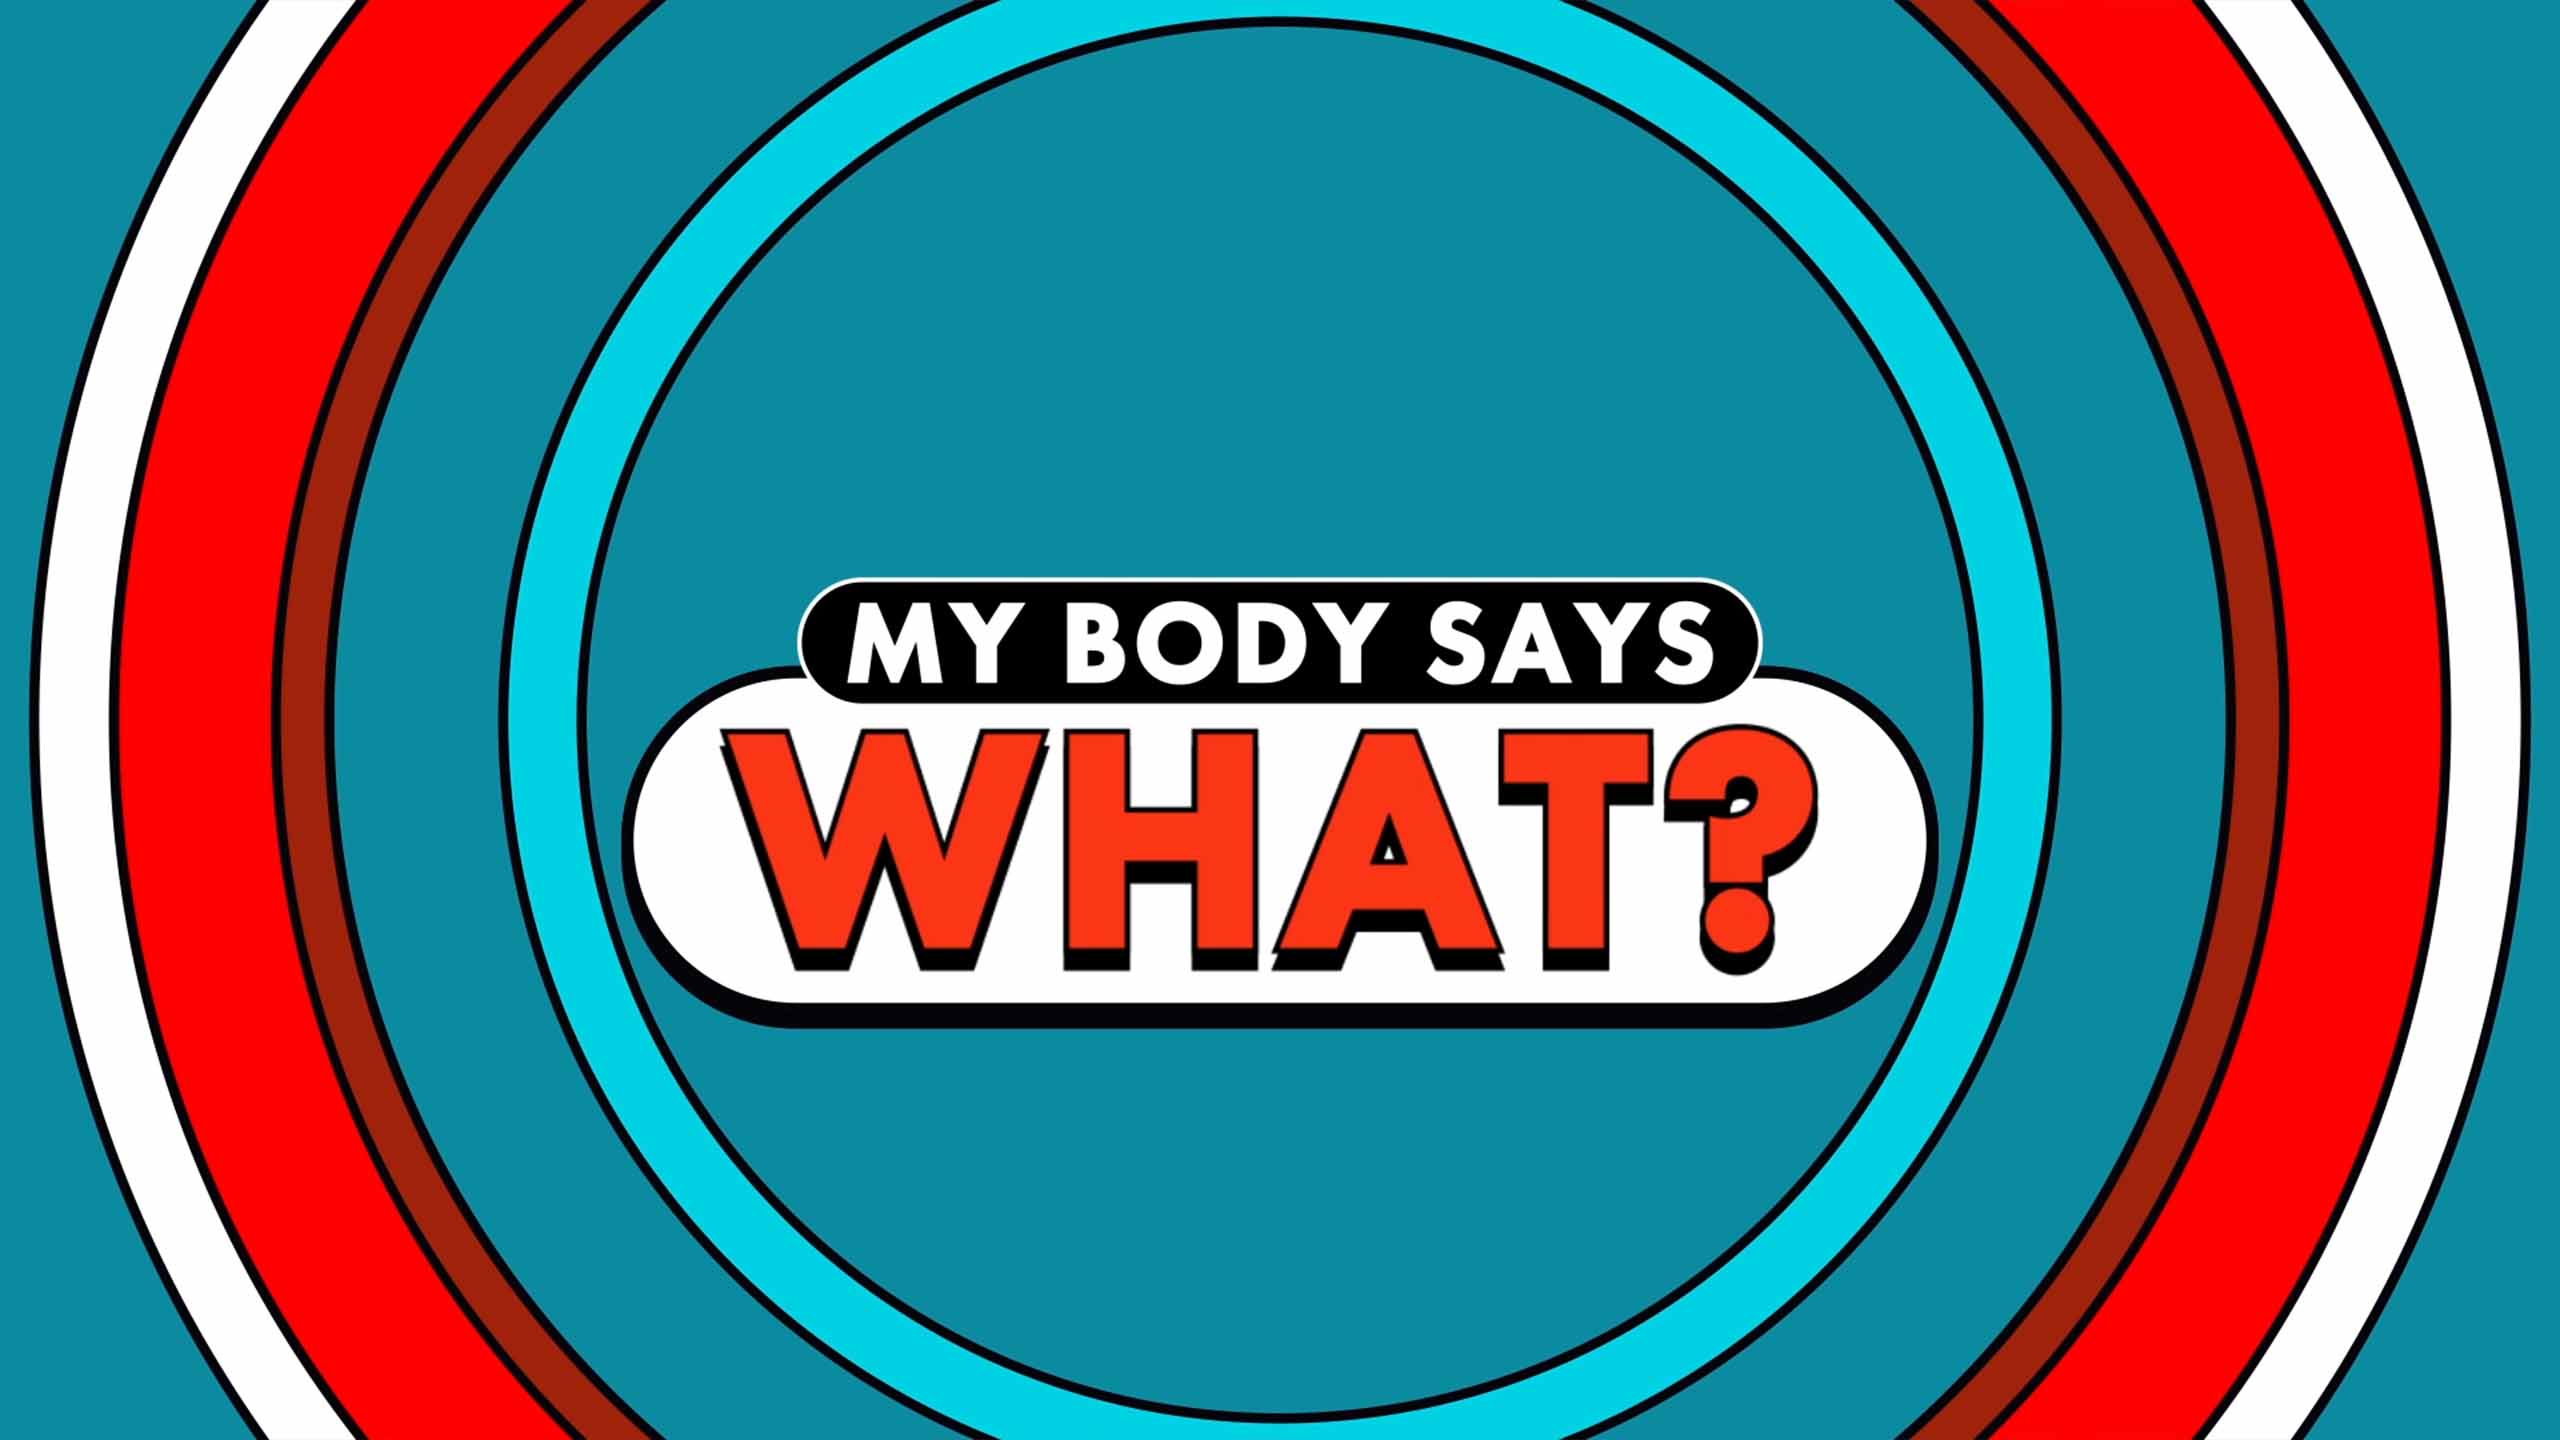 My Body Says What?